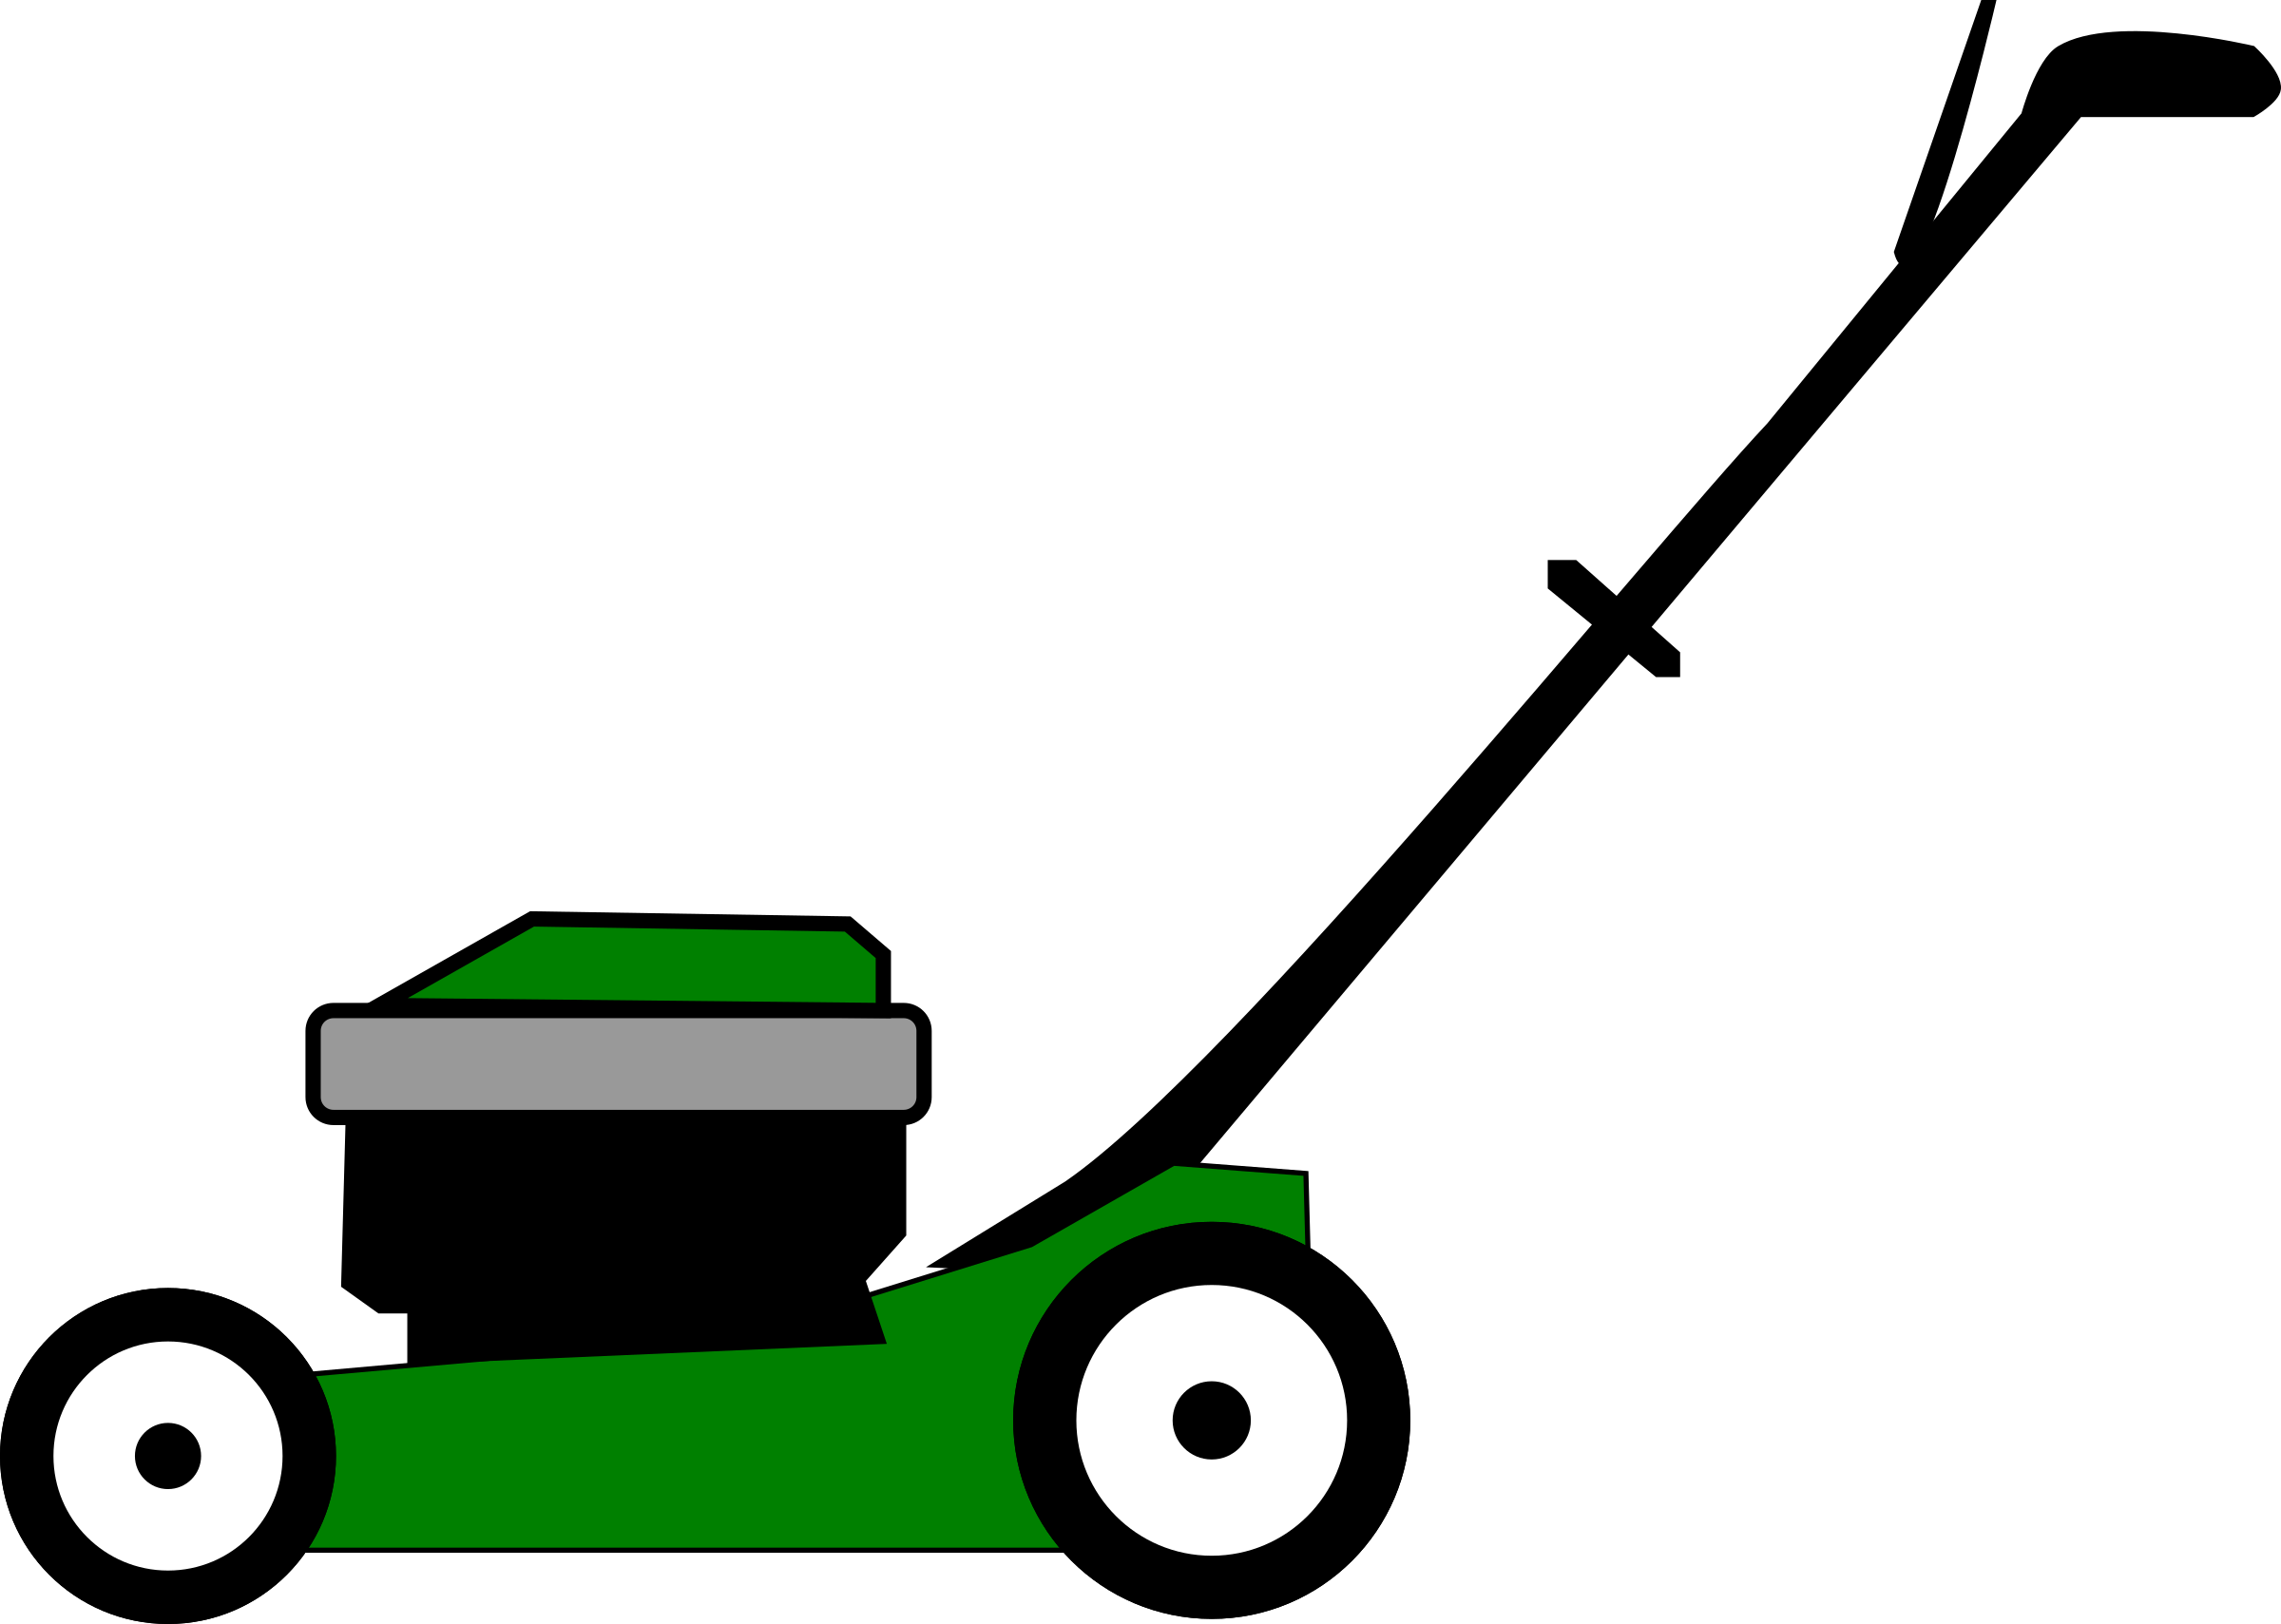 Lawnmower vector clipart image Free stock photo Public